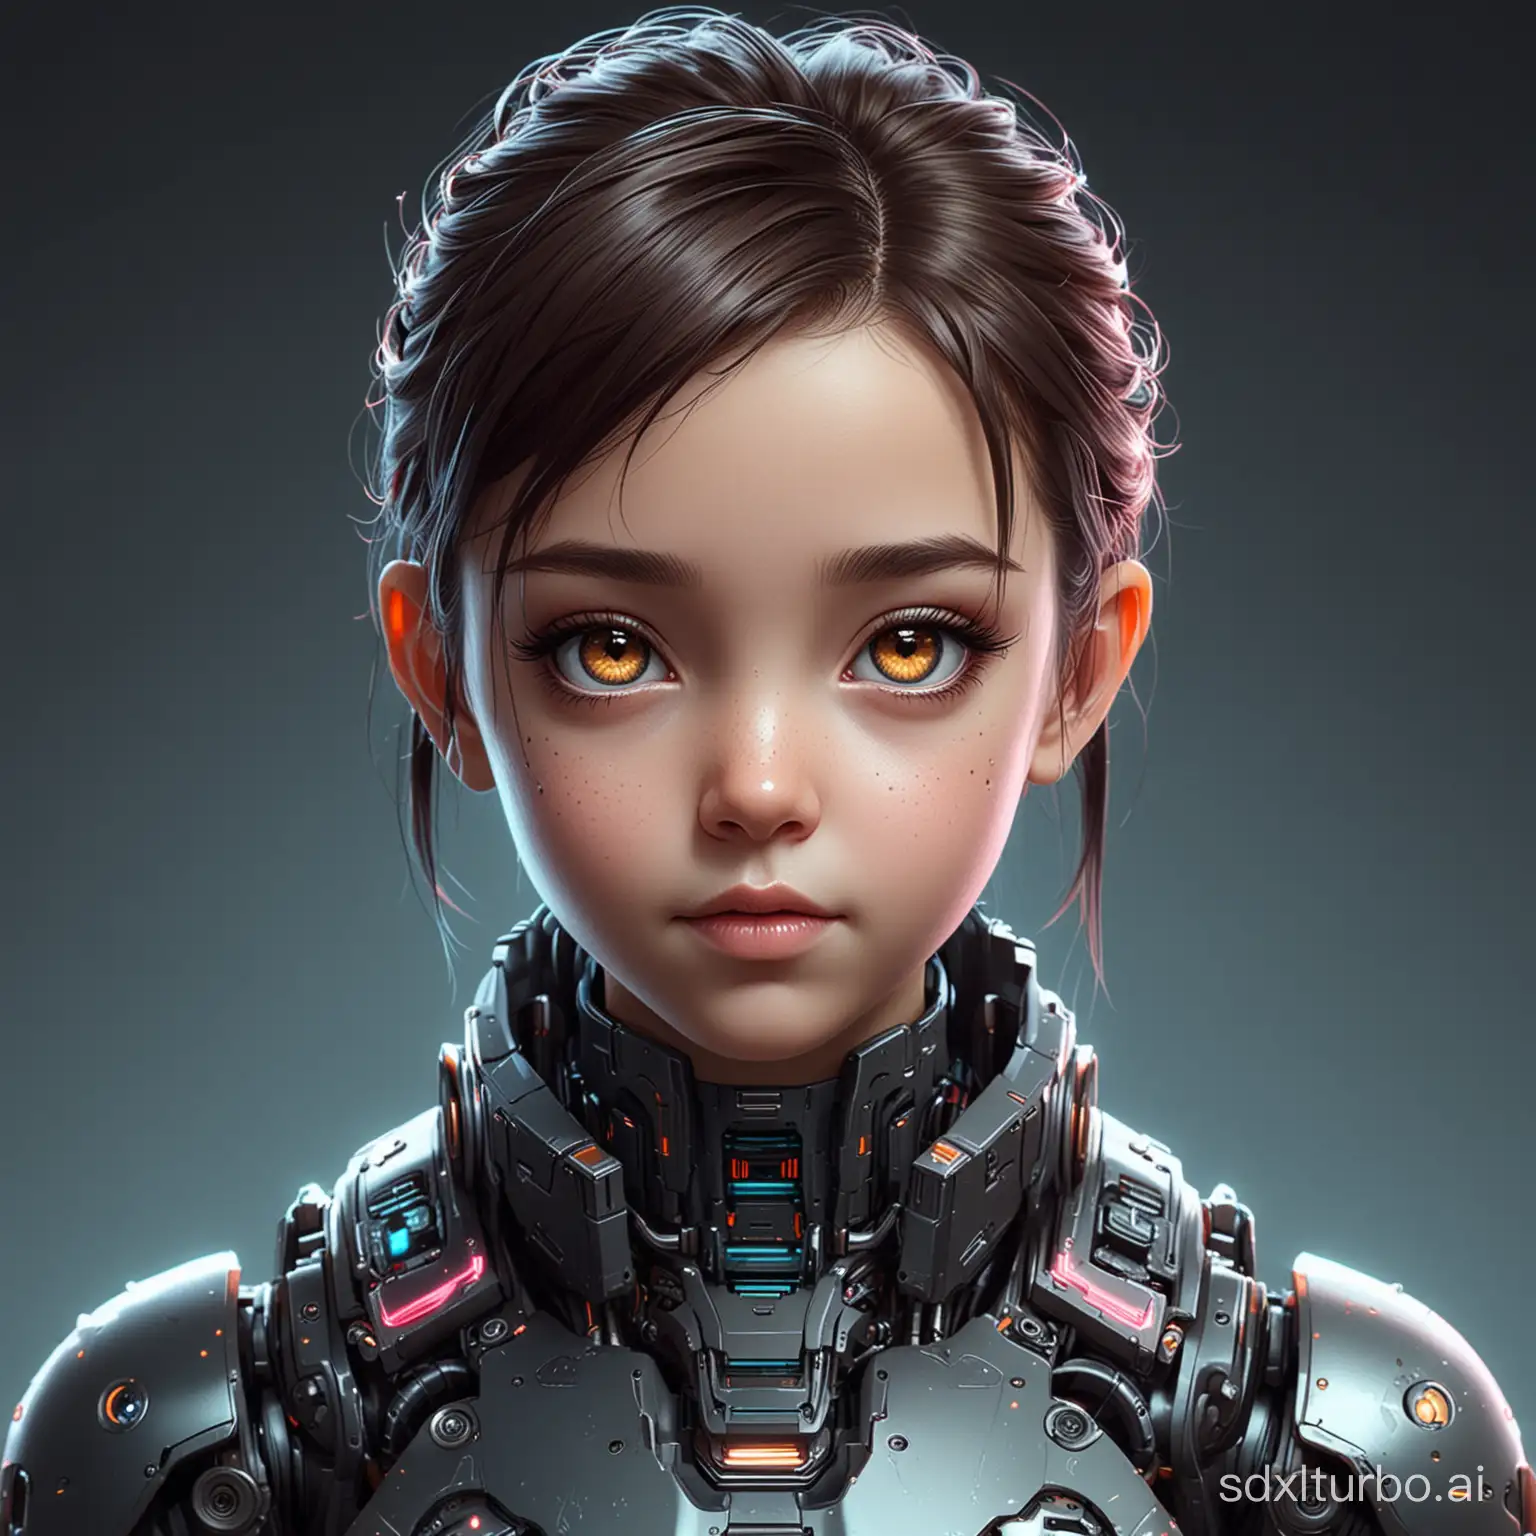 Little-Girl-with-Cyberpunk-Style-Robot-Avatar-in-HighQuality-Digital-Art